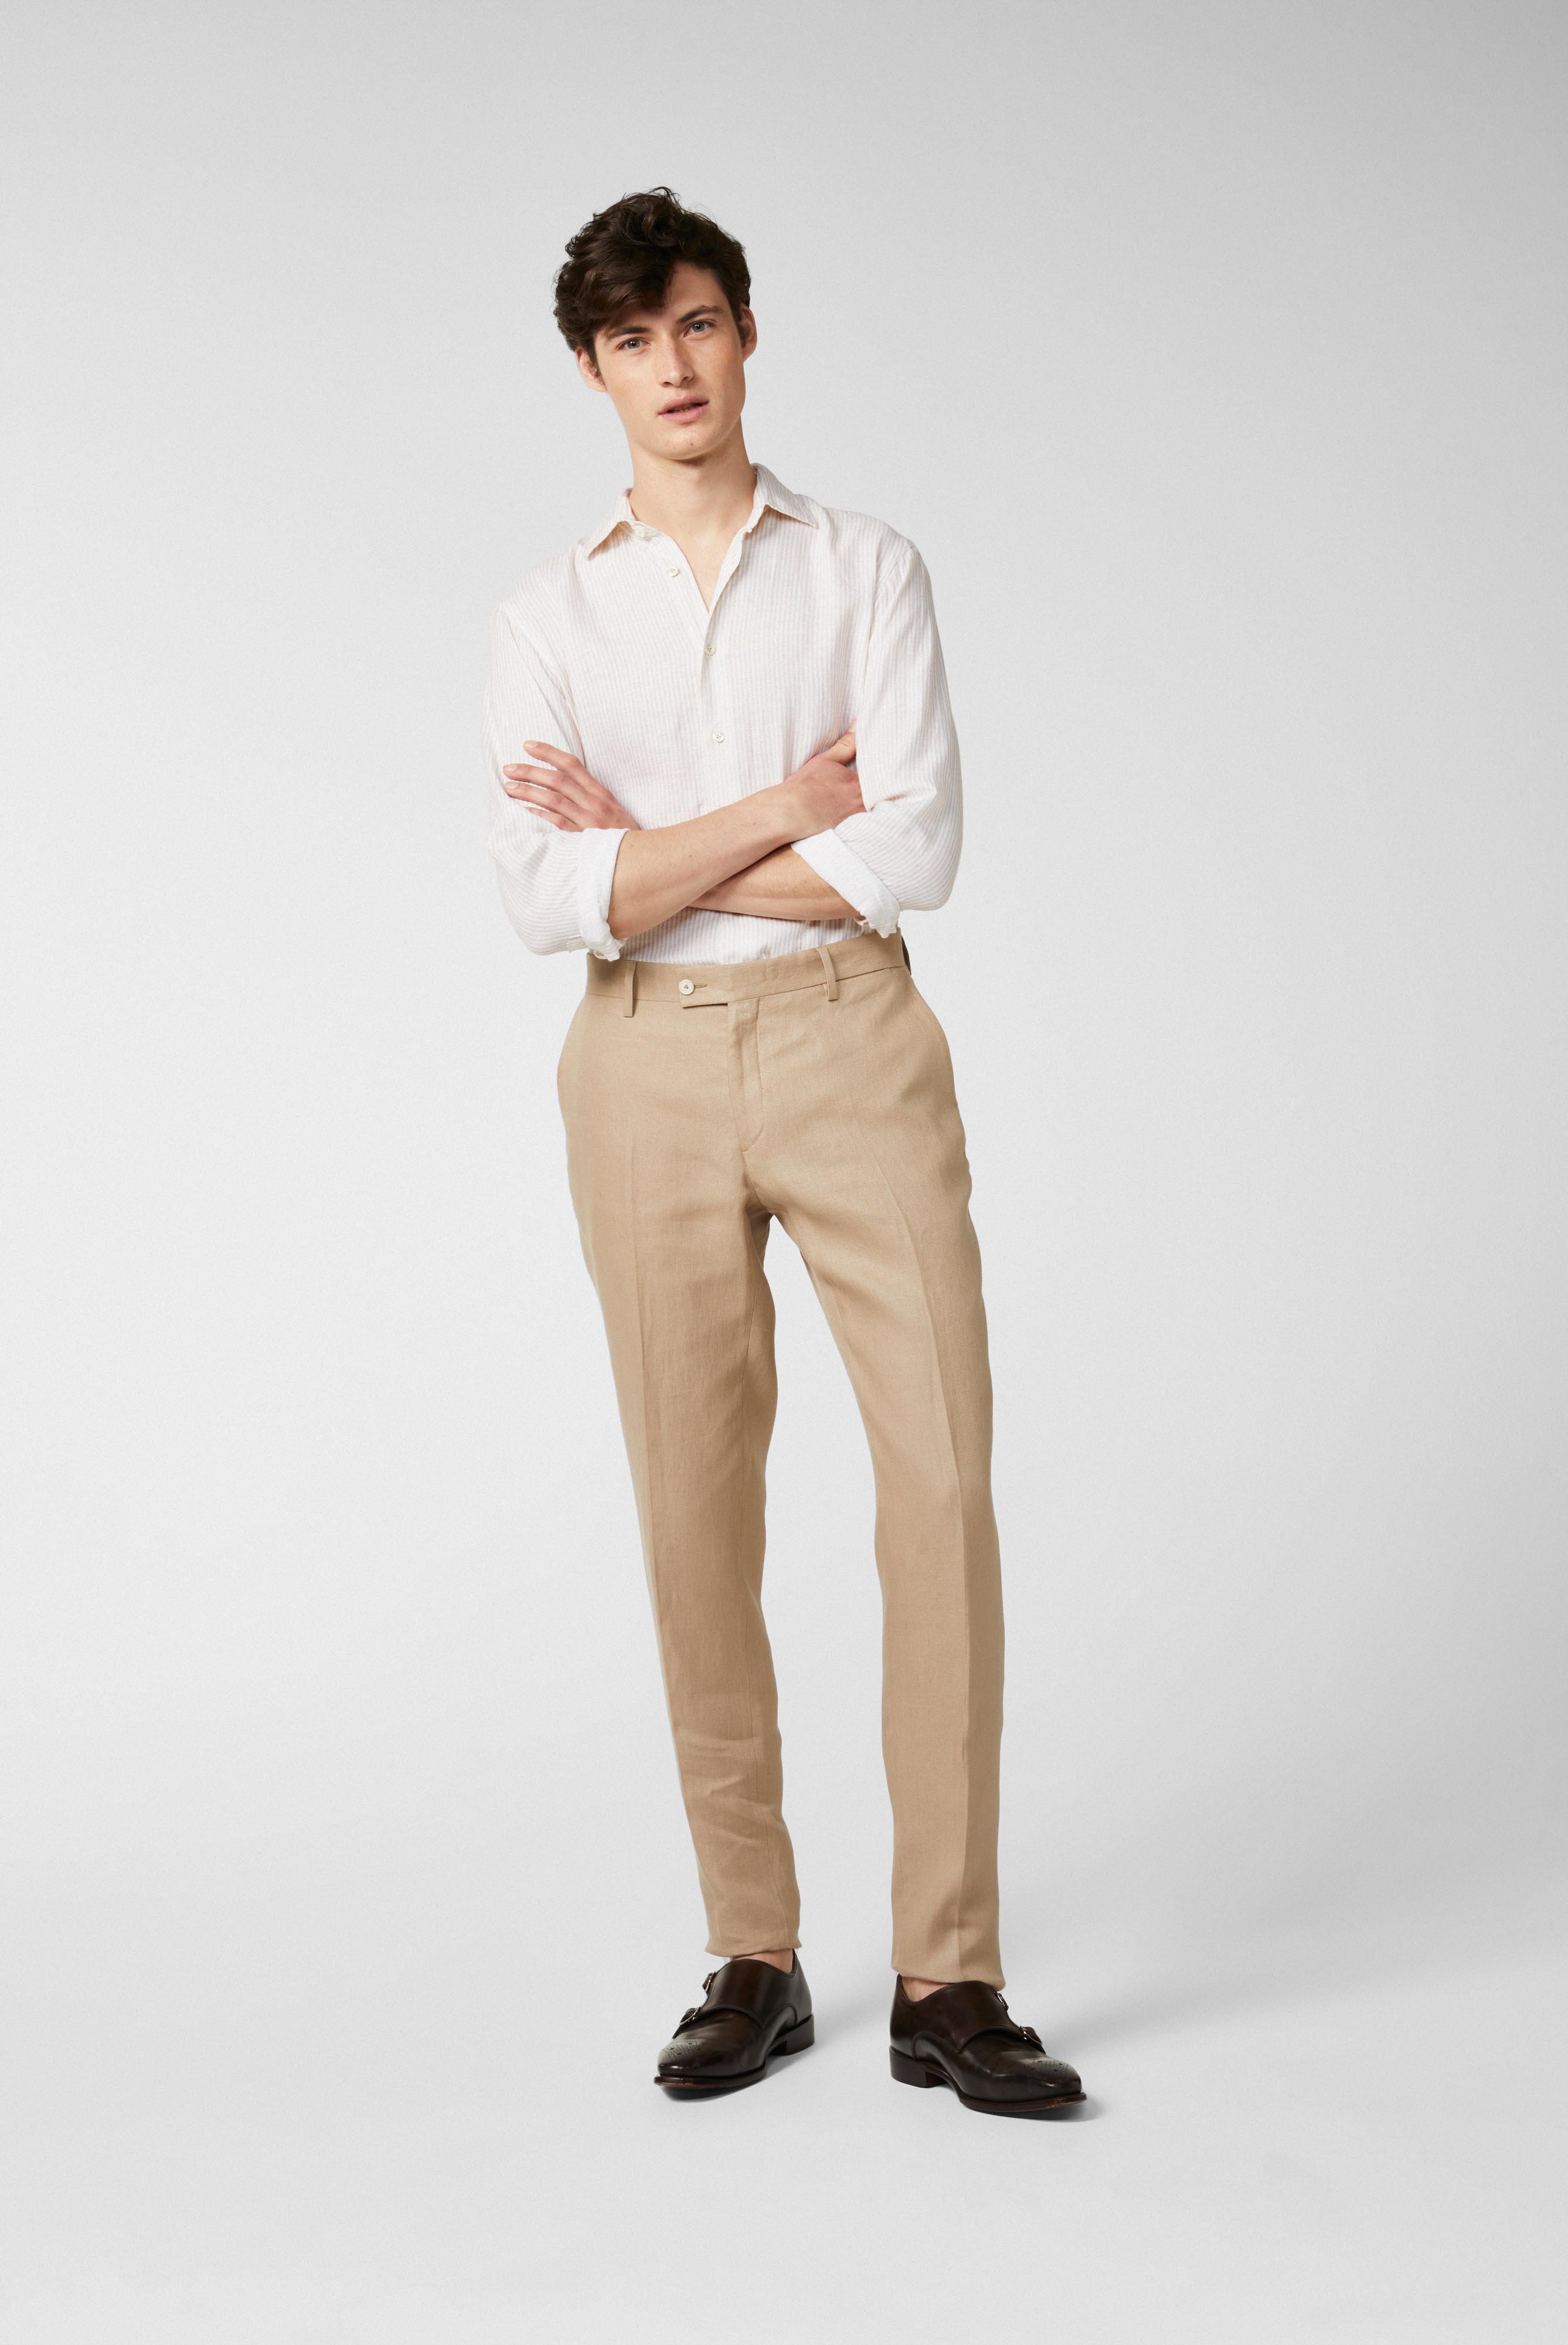 Jeans & Trousers+Slim-fit trousers in textured linen fabric beige+80.7854.16.H55045.130.50